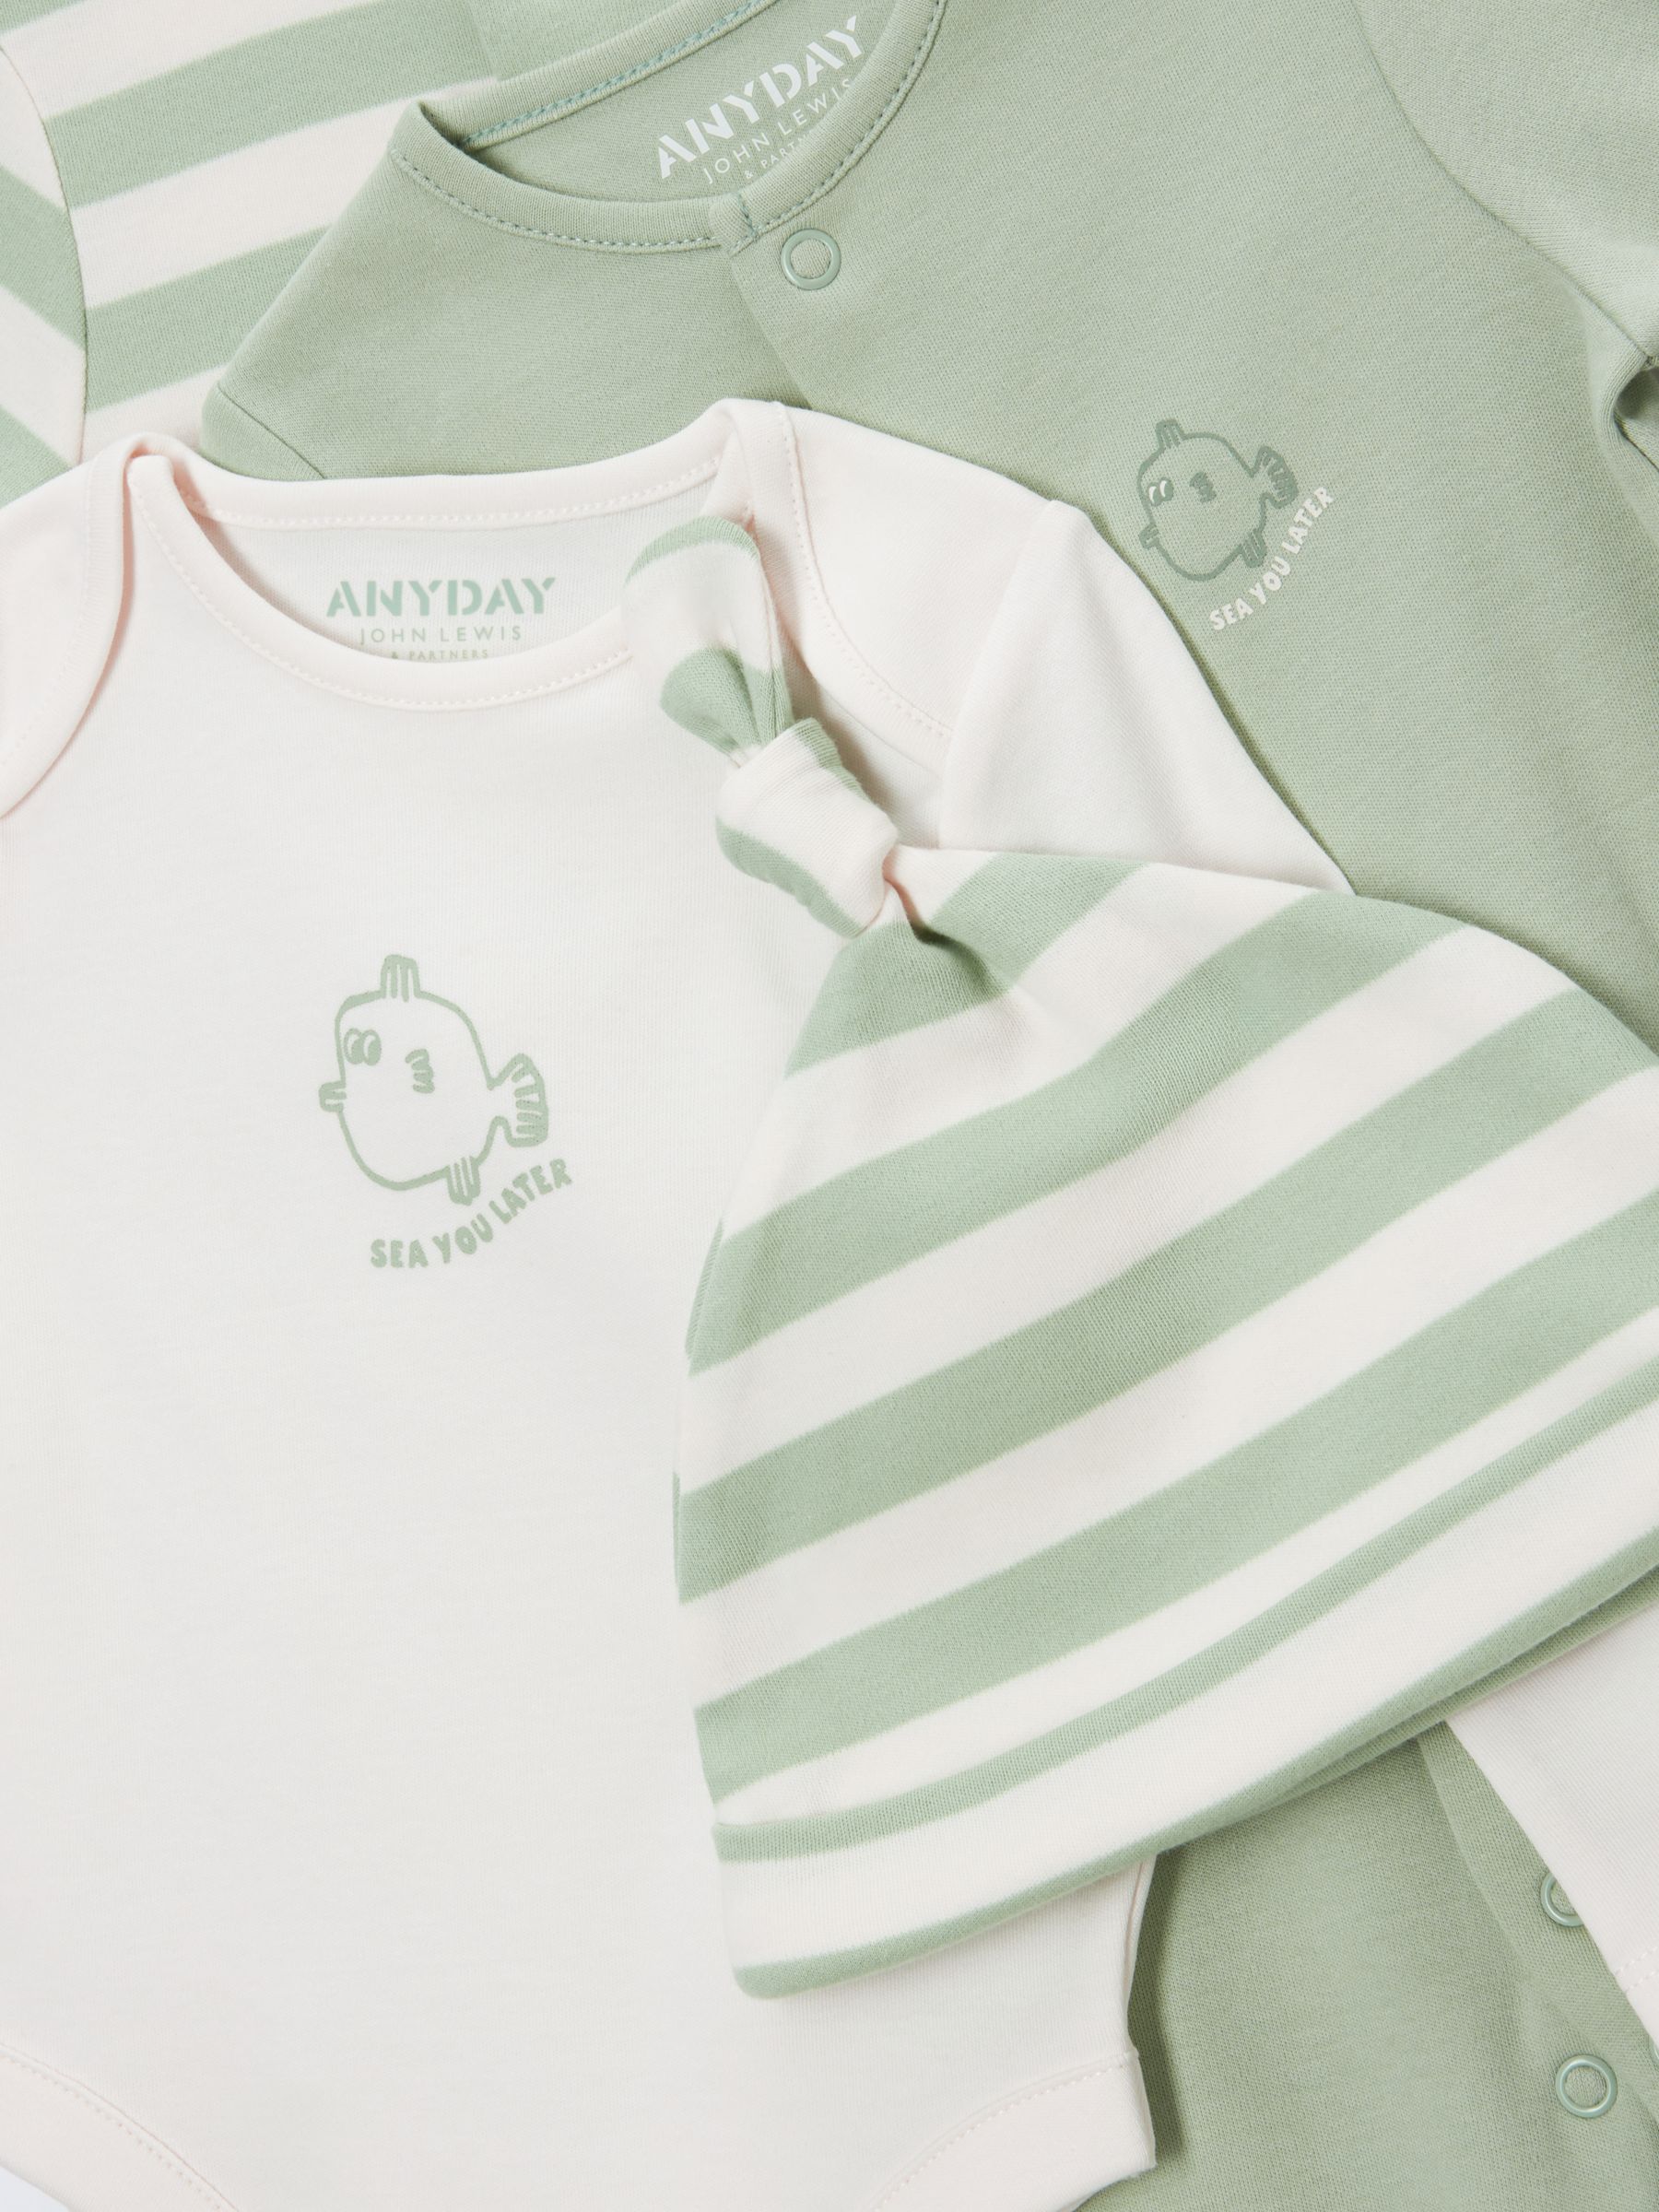 John Lewis ANYDAY Baby Sleepsuit, Bodysuit and Hat Set, Green, 0-3 months